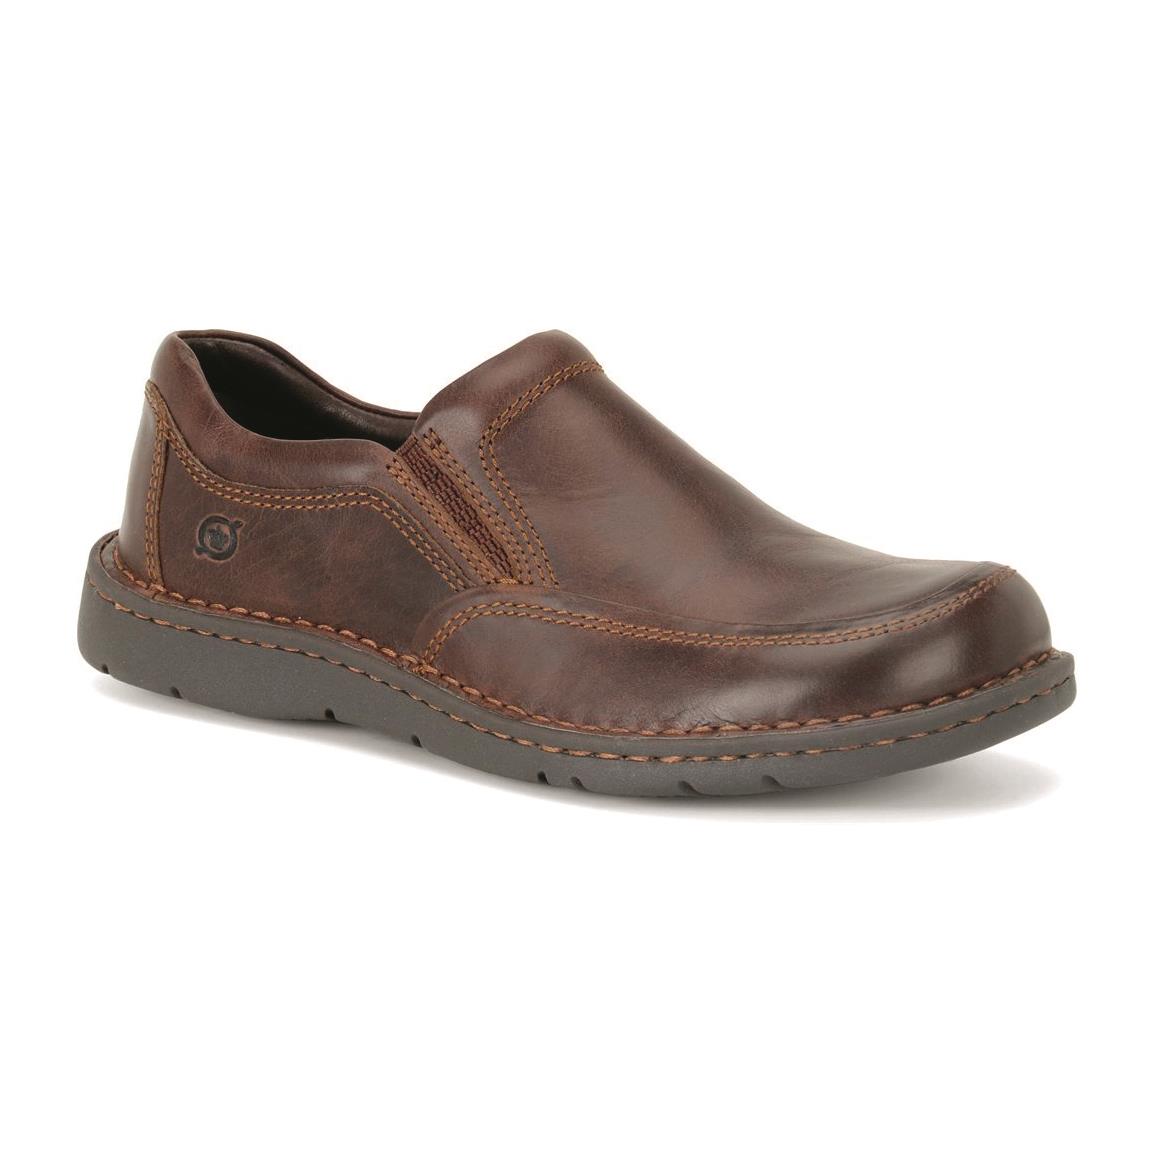 Men's Dr. Scholl's Bounce Slip-on Shoes, Bridle Brown - 590541, Casual ...